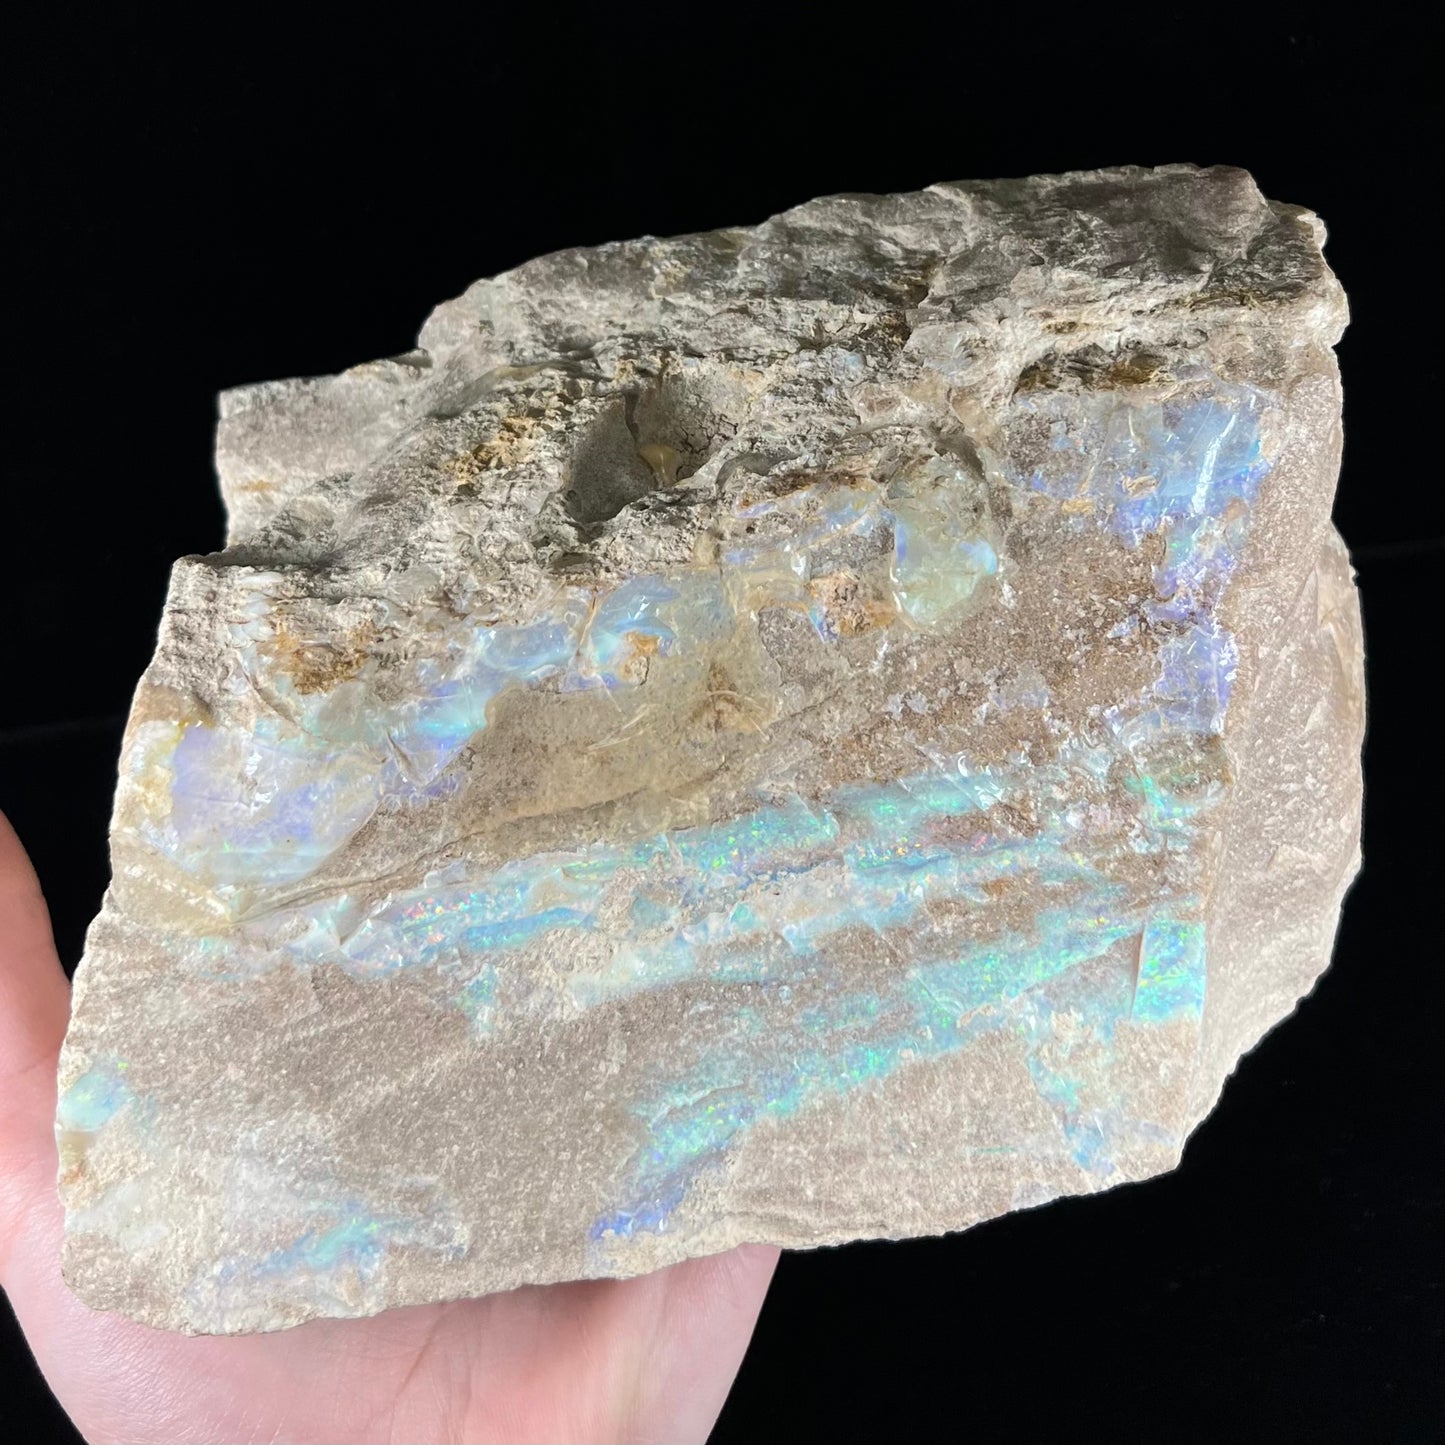 A rough Painted Lady boulder opal specimen that shows blue, green, and pinkish red colors.